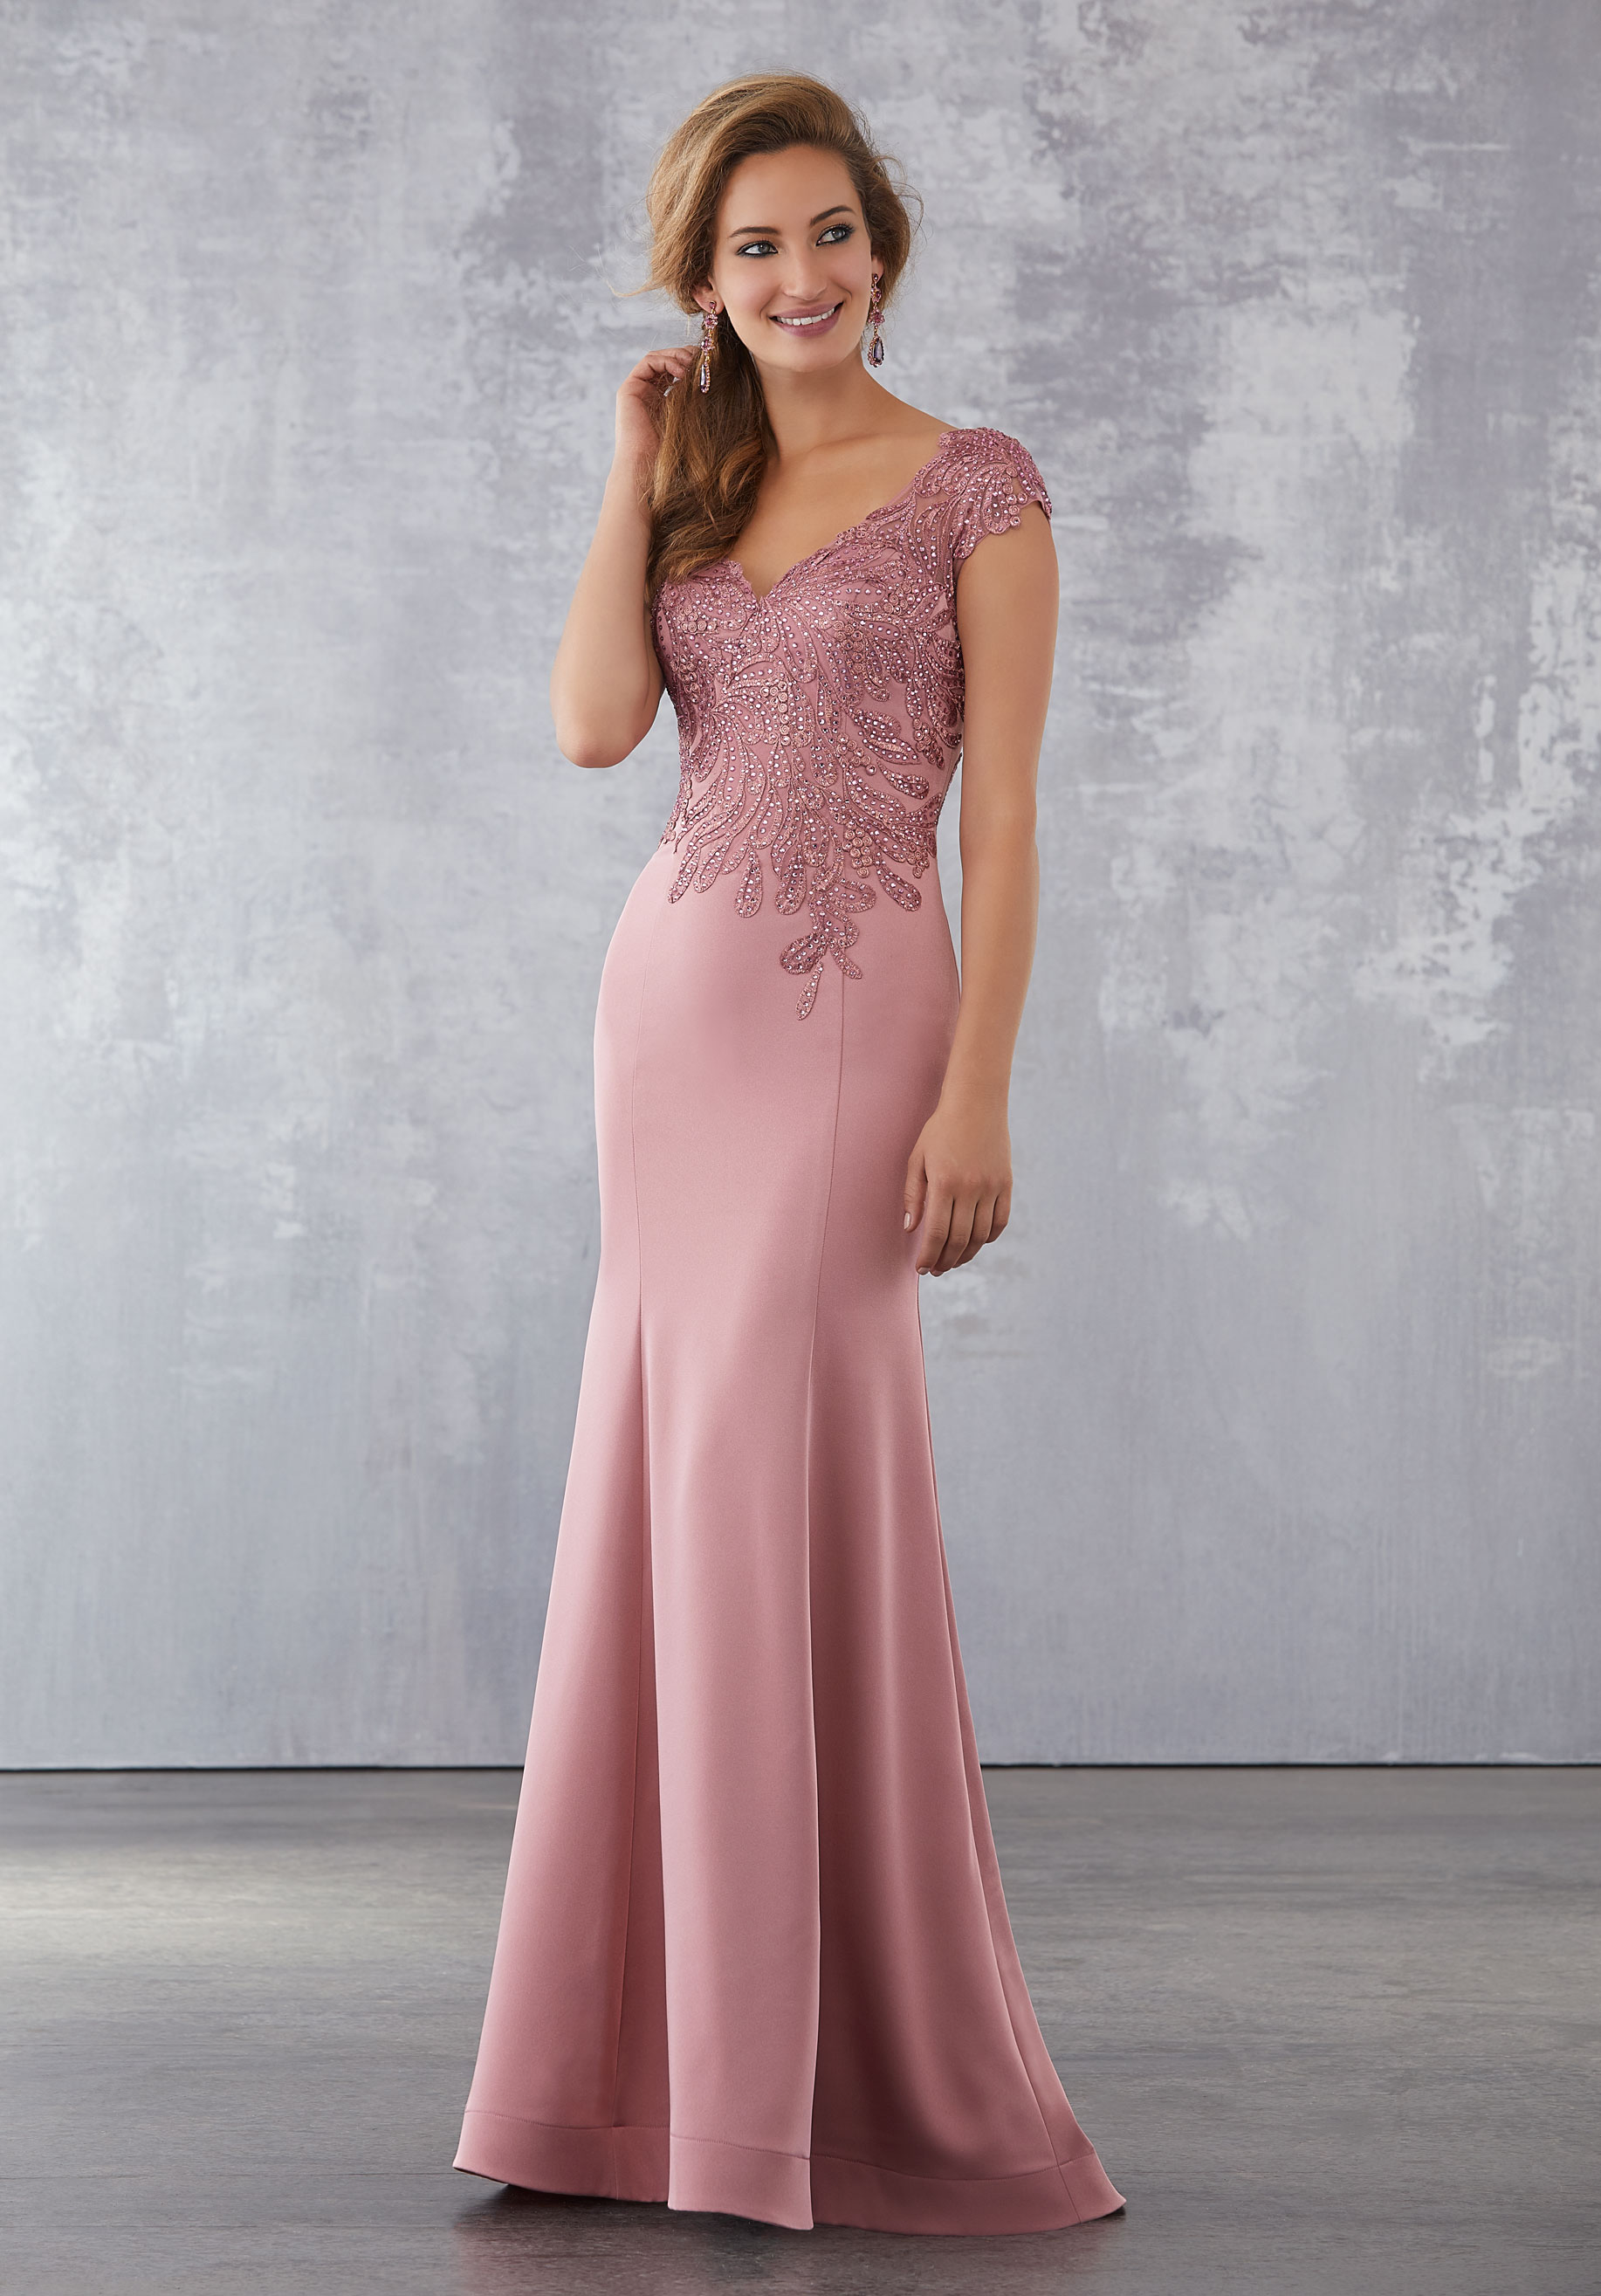 Tastefully combine the dress for the special occasion